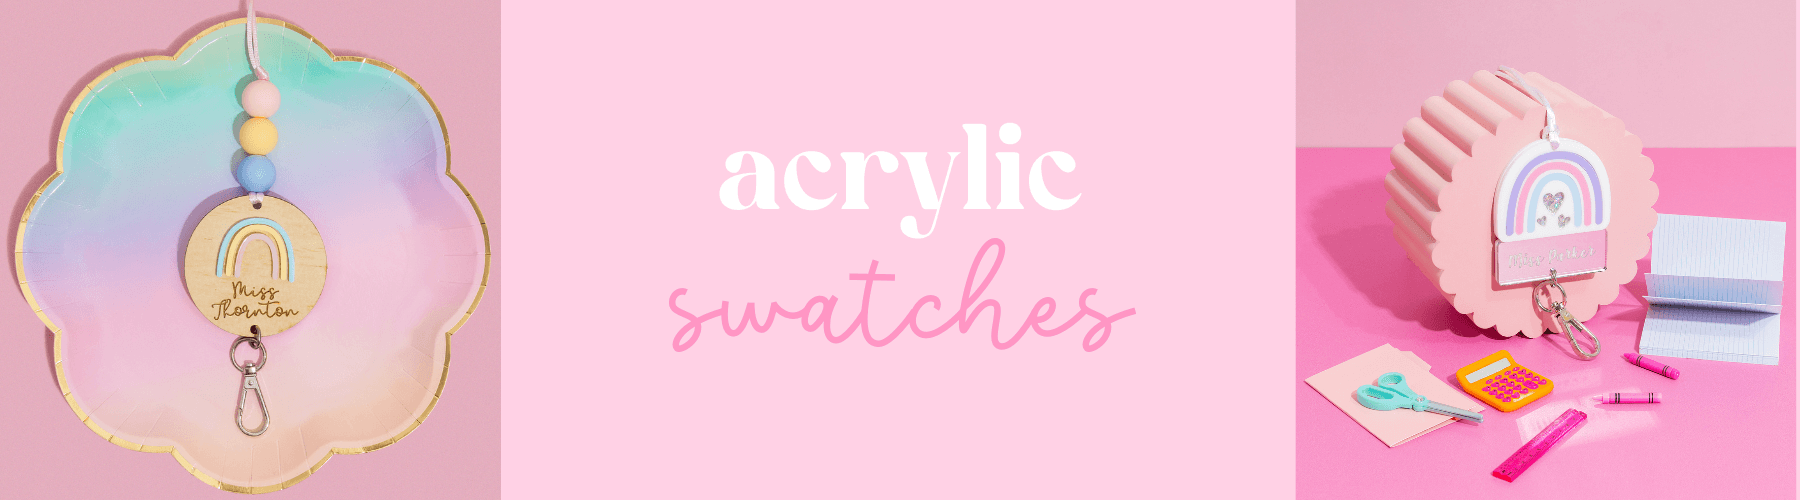 Acrylic Swatches - Milkie Co